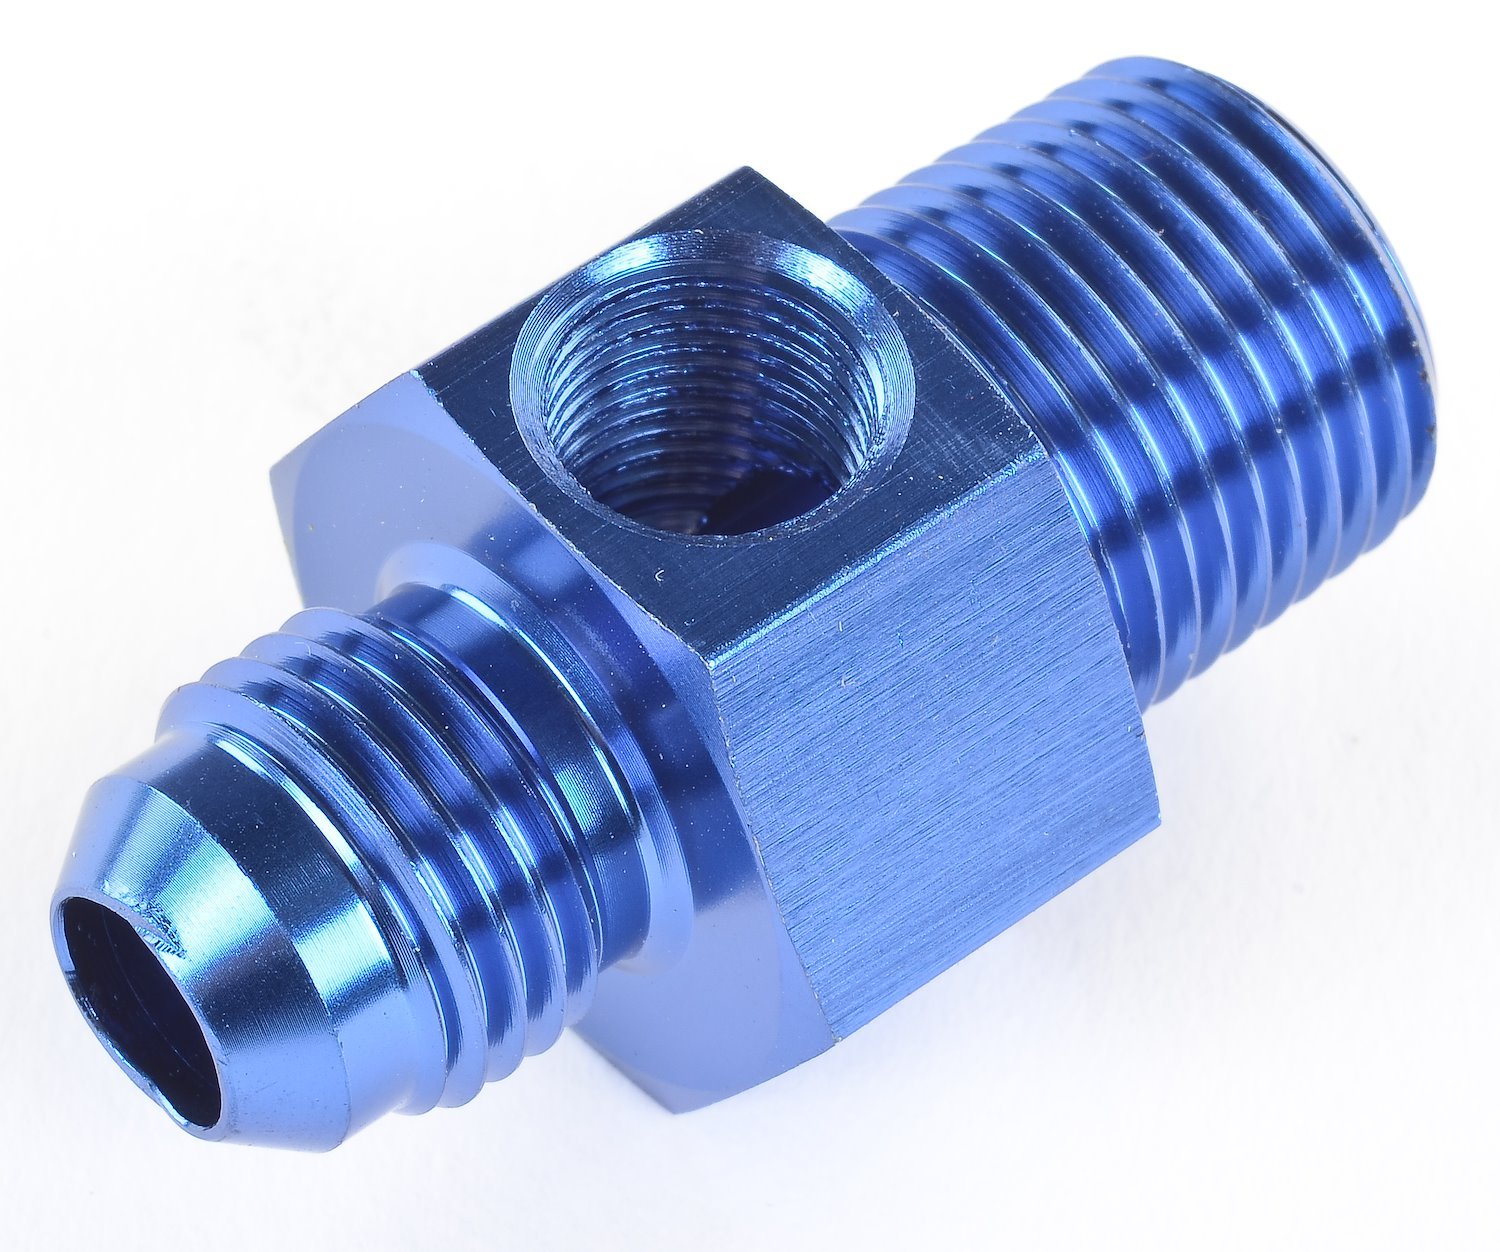 AN8 AN-8 Male to 1/2" 0.5" Aluminum Fuel Hose Tube Straight Fittings Adapter